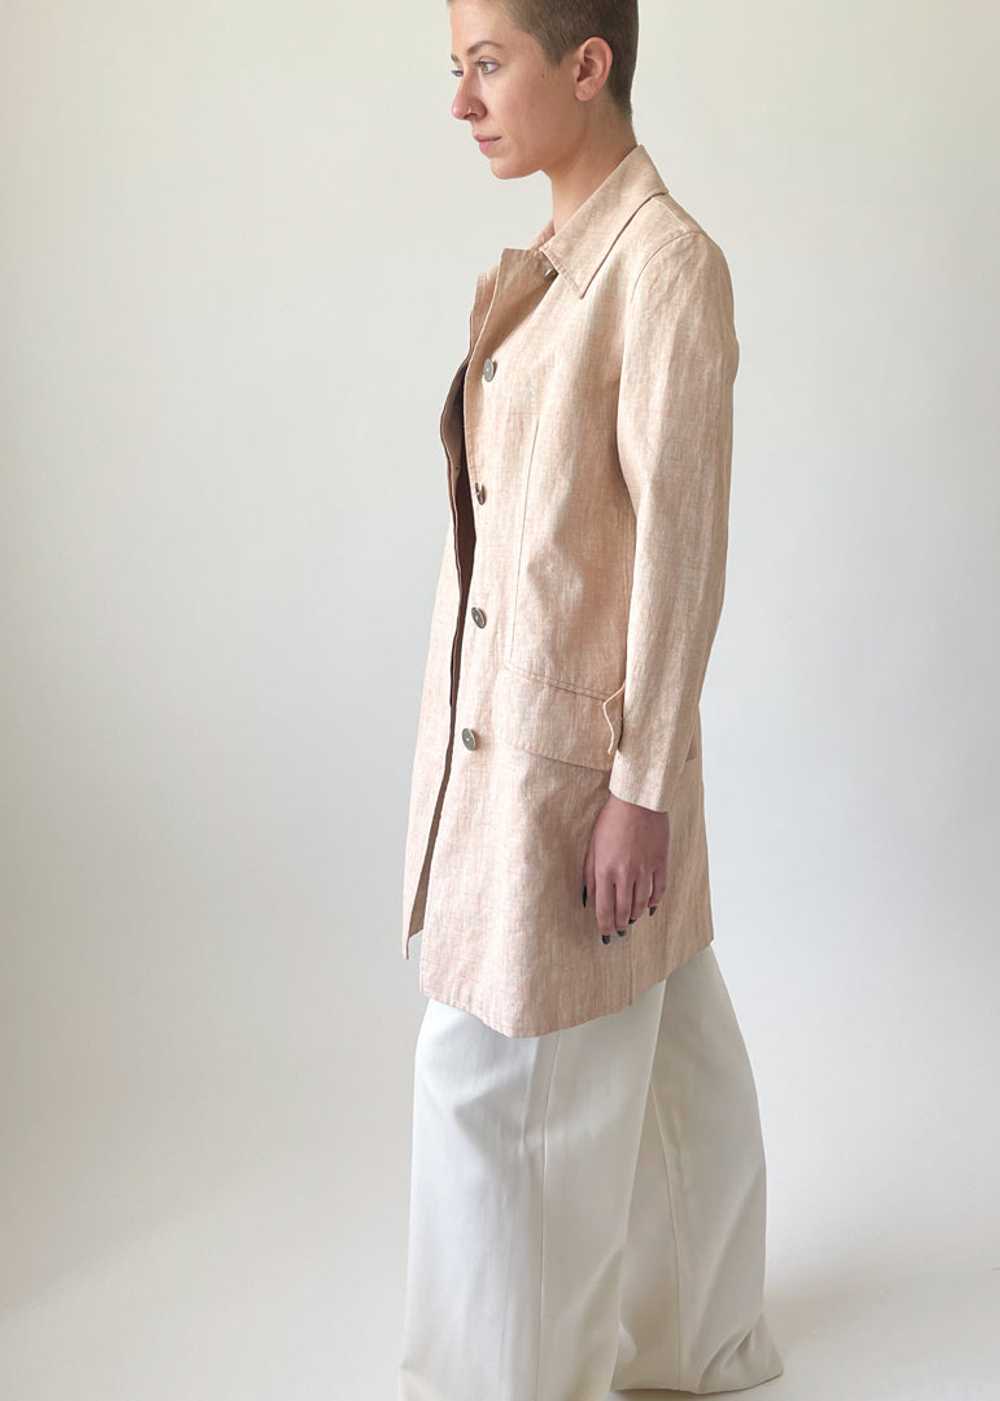 Vintage Late 1990s Chanel Linen Trench Coat - image 3